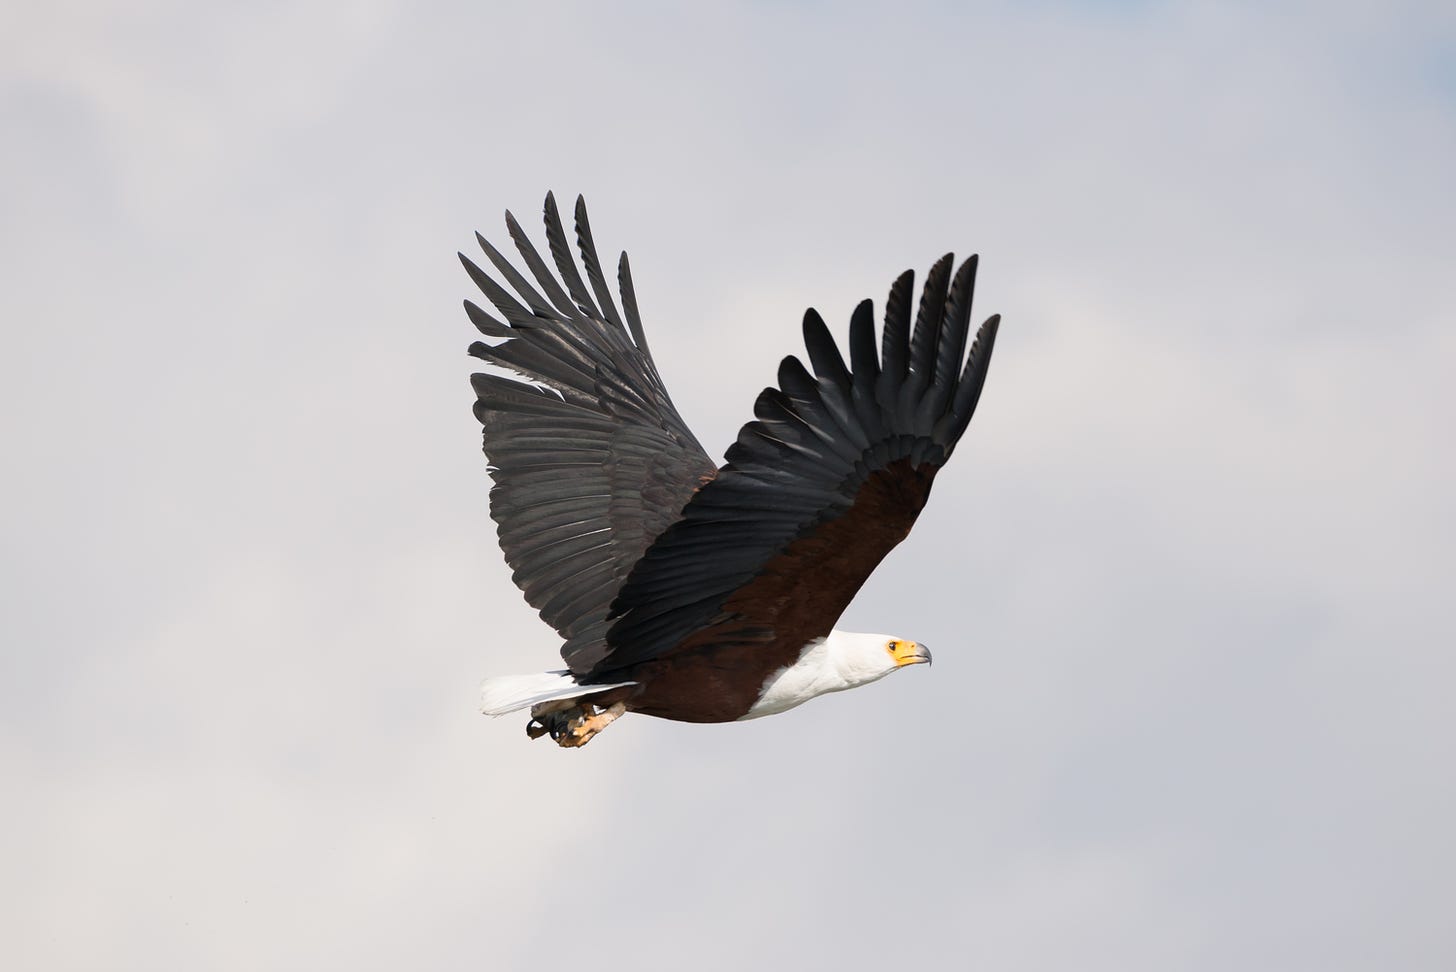 African fish eagle flying with wings raised